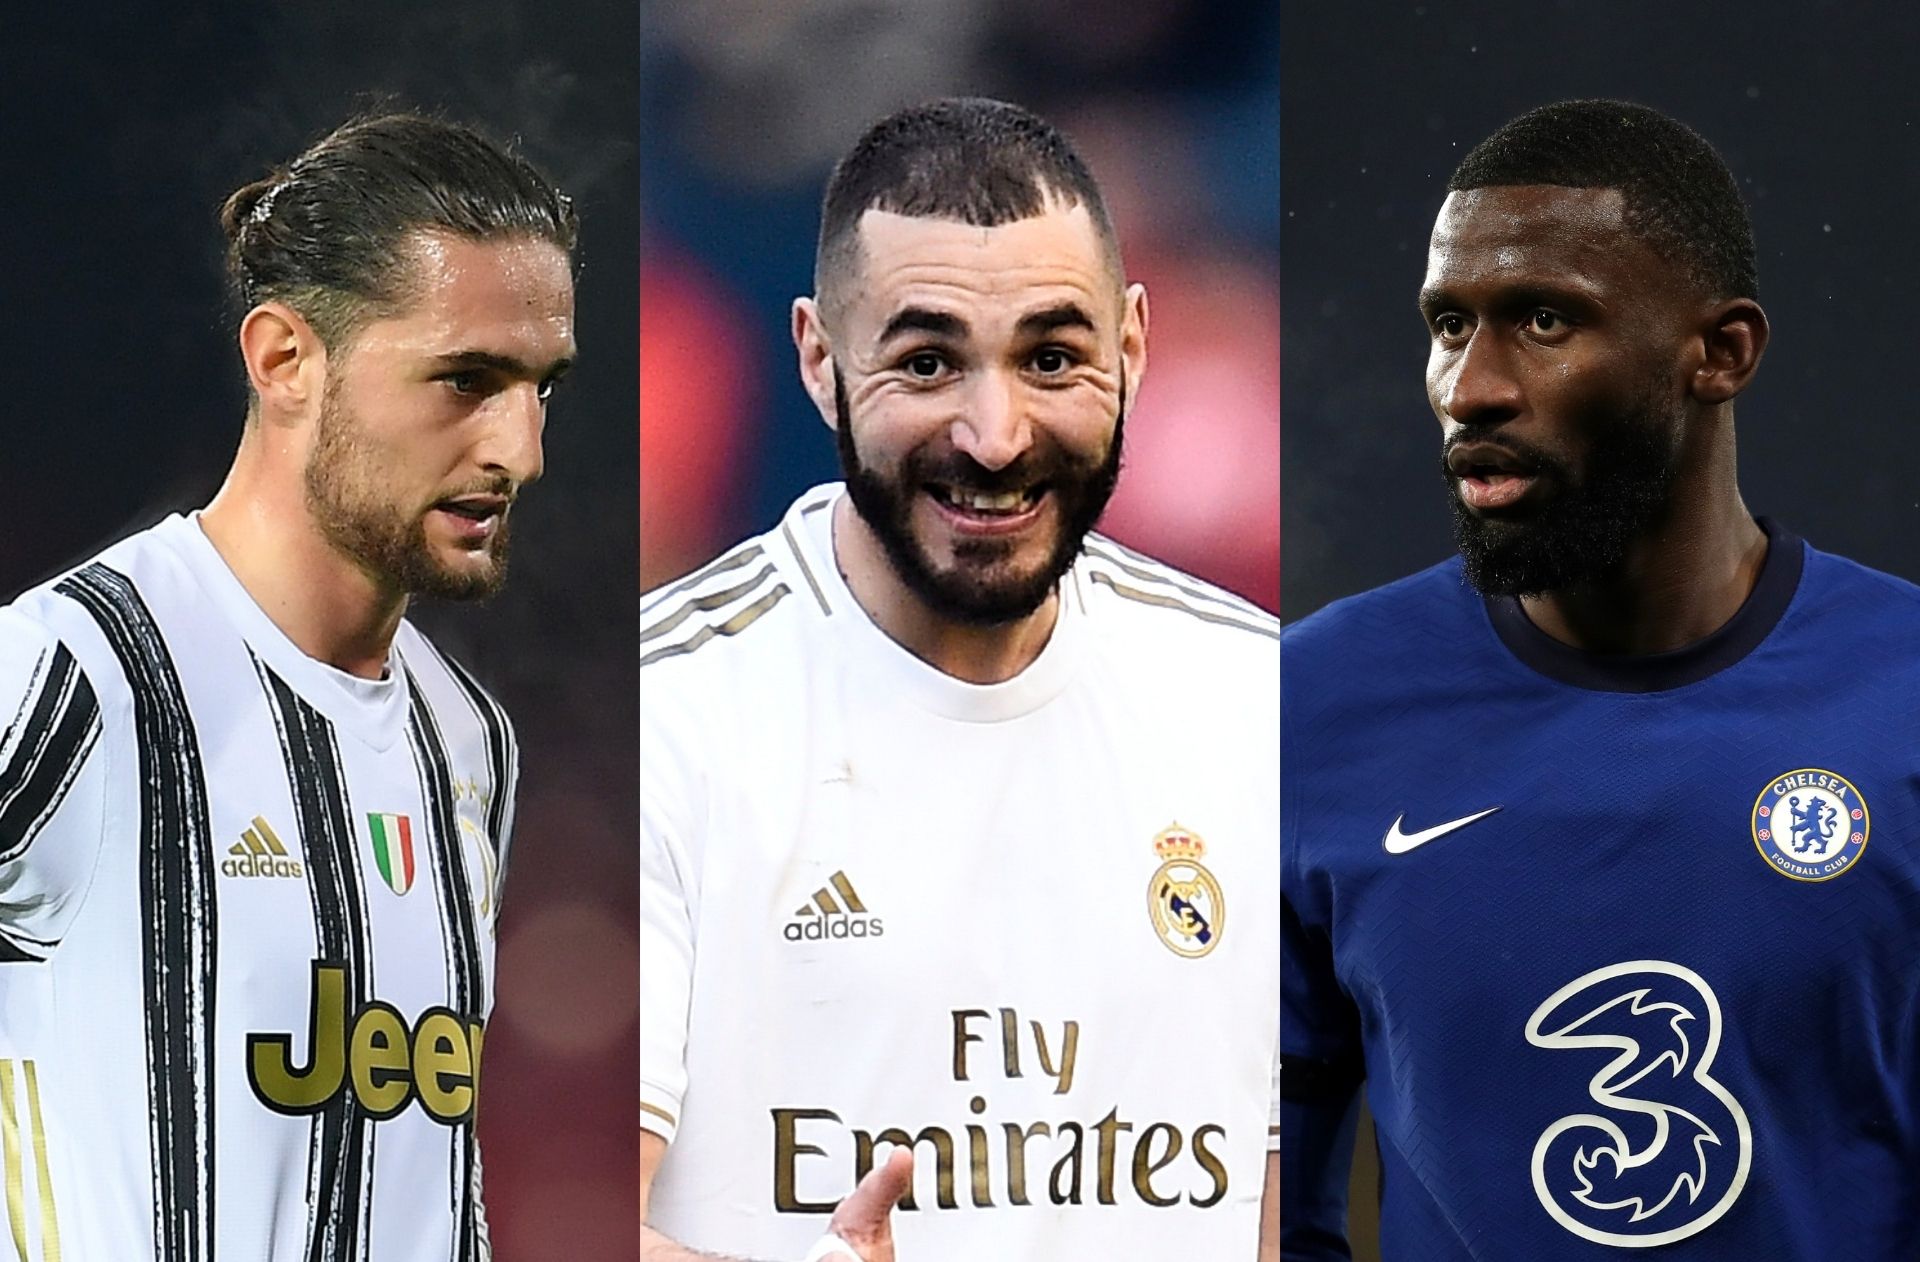 Sunday's transfer rumors - Chelsea make a move for Real Madrid star